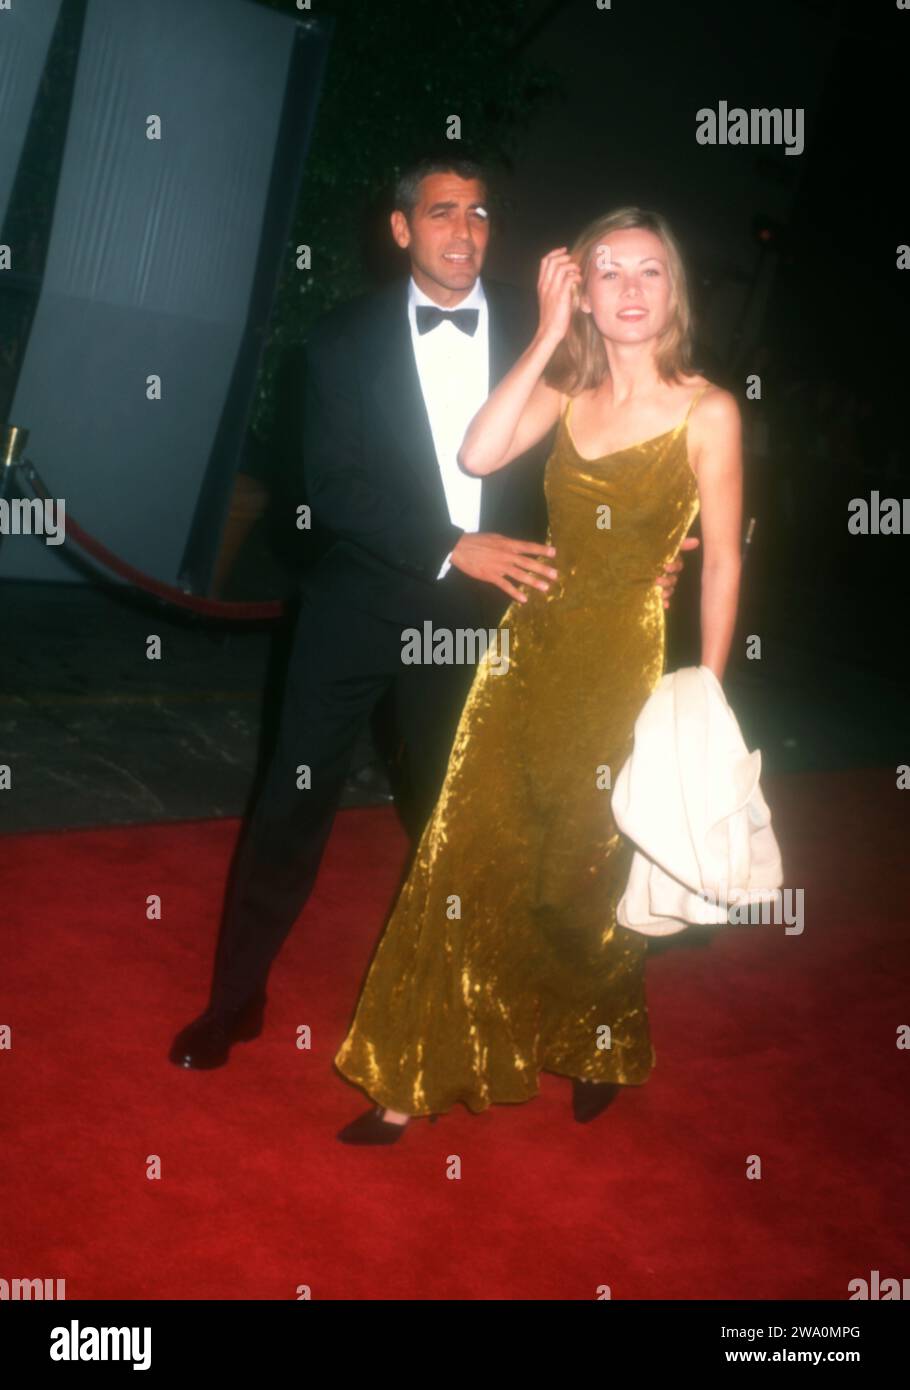 Burbank, California, USA 17th October 1996 Actor George Clooney and Celine Balitran attend Sixth Annual Fire & Ice Ball to Benefit Revlon/UCLA WomenÕs Cancer Research on October 17, 1996 at Warner Bros. Studios in Burbank, California, USA. Photo by Barry King/Alamy Stock Photo Stock Photo